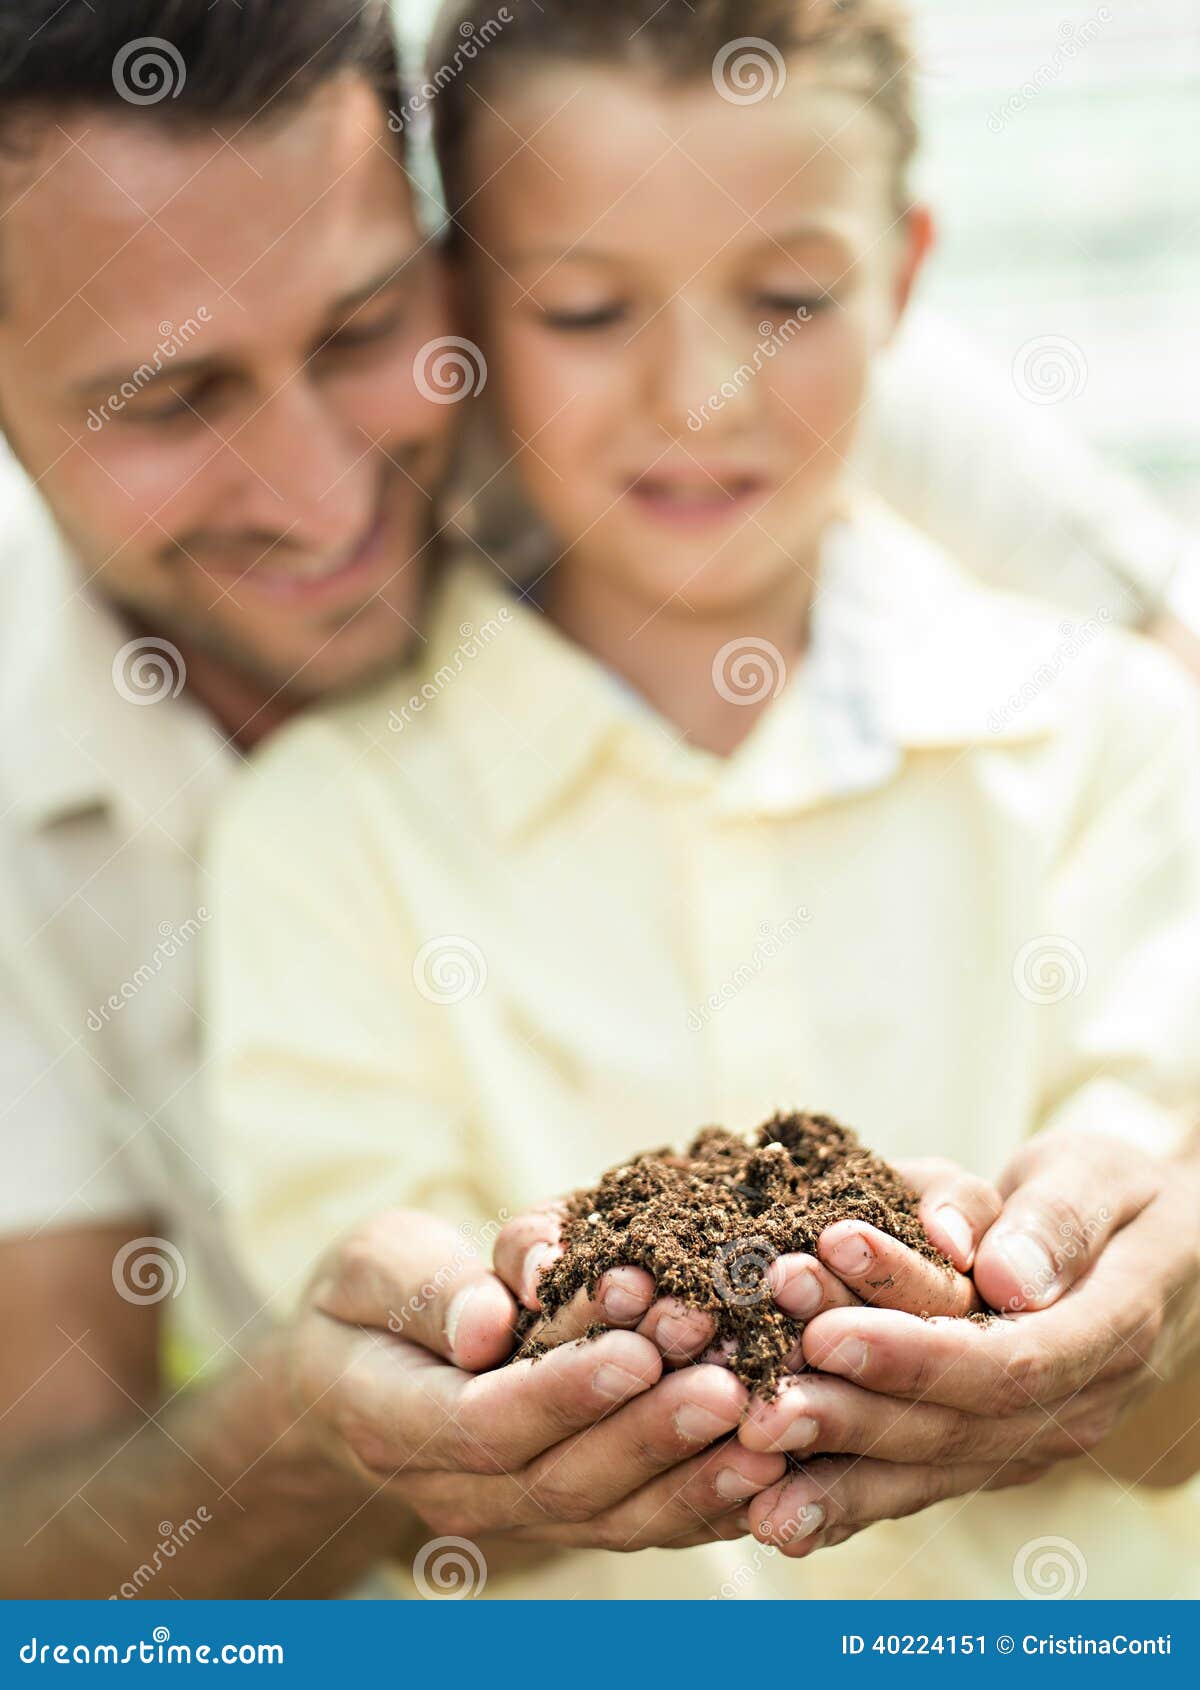 father educate son to care a soil